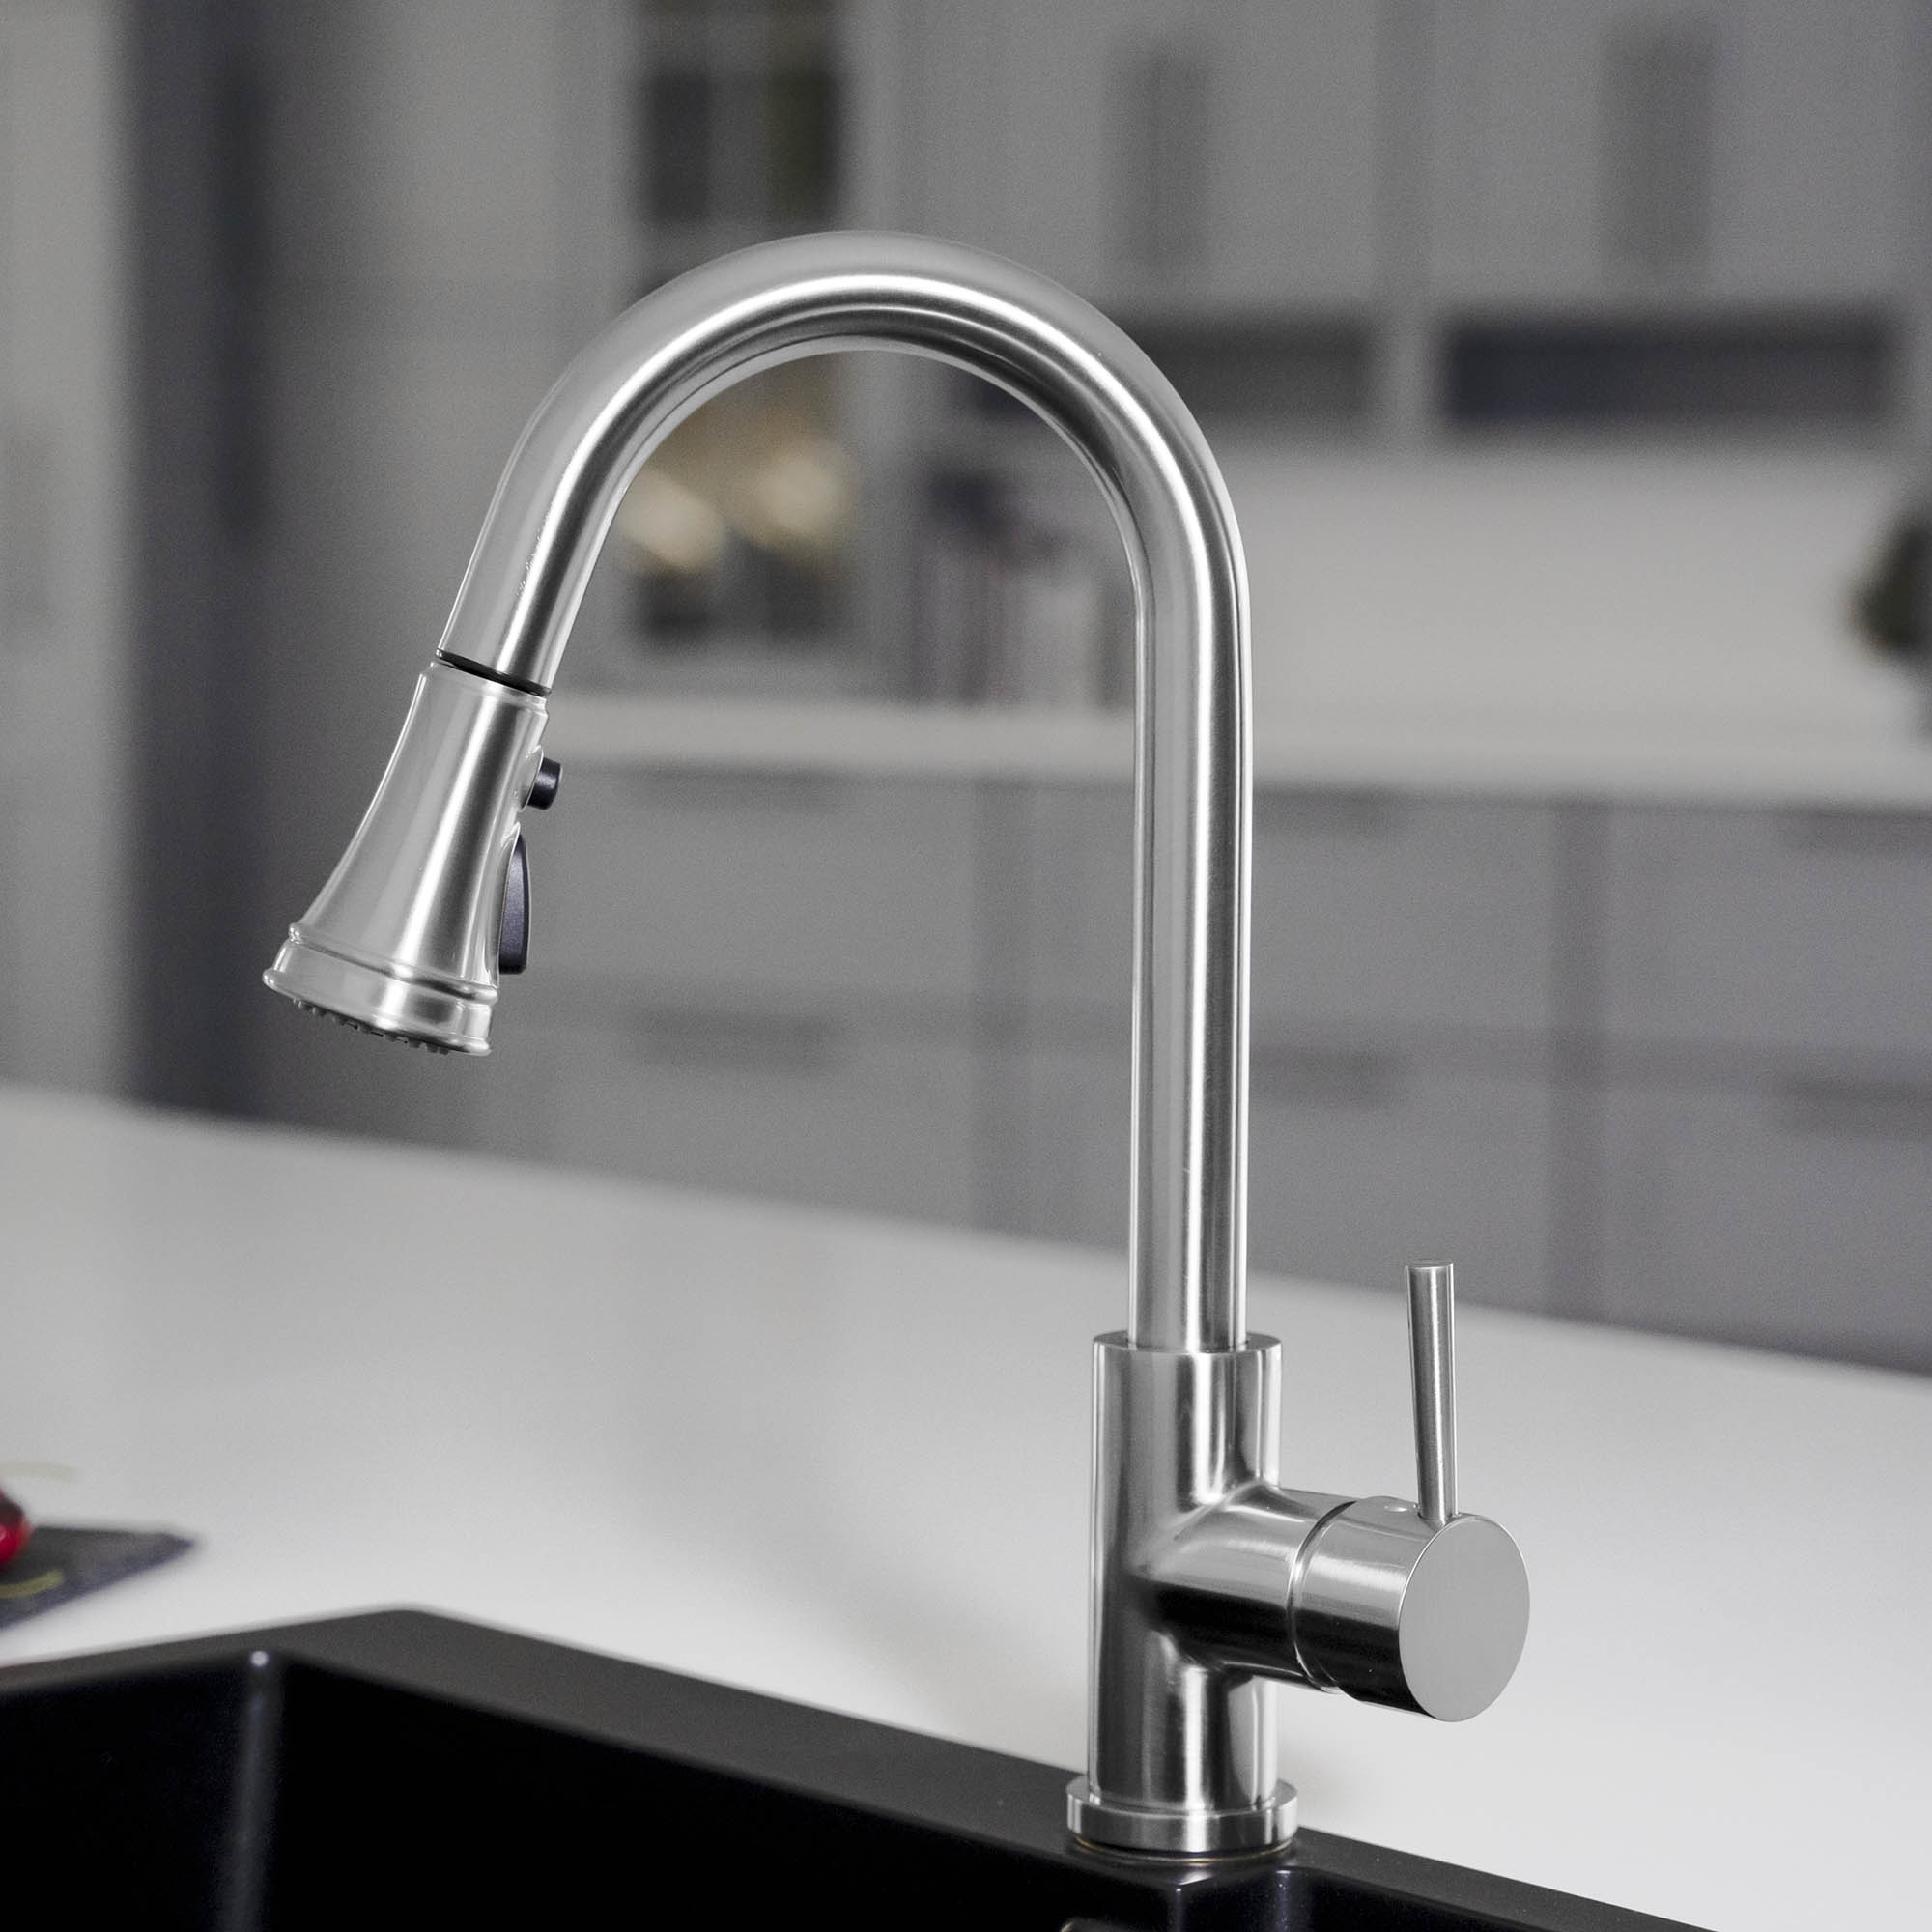 WOODBRIDGE WK090801CH Stainless Steel Single Handle Pull Down Kitchen Faucet in Chrome Finish.